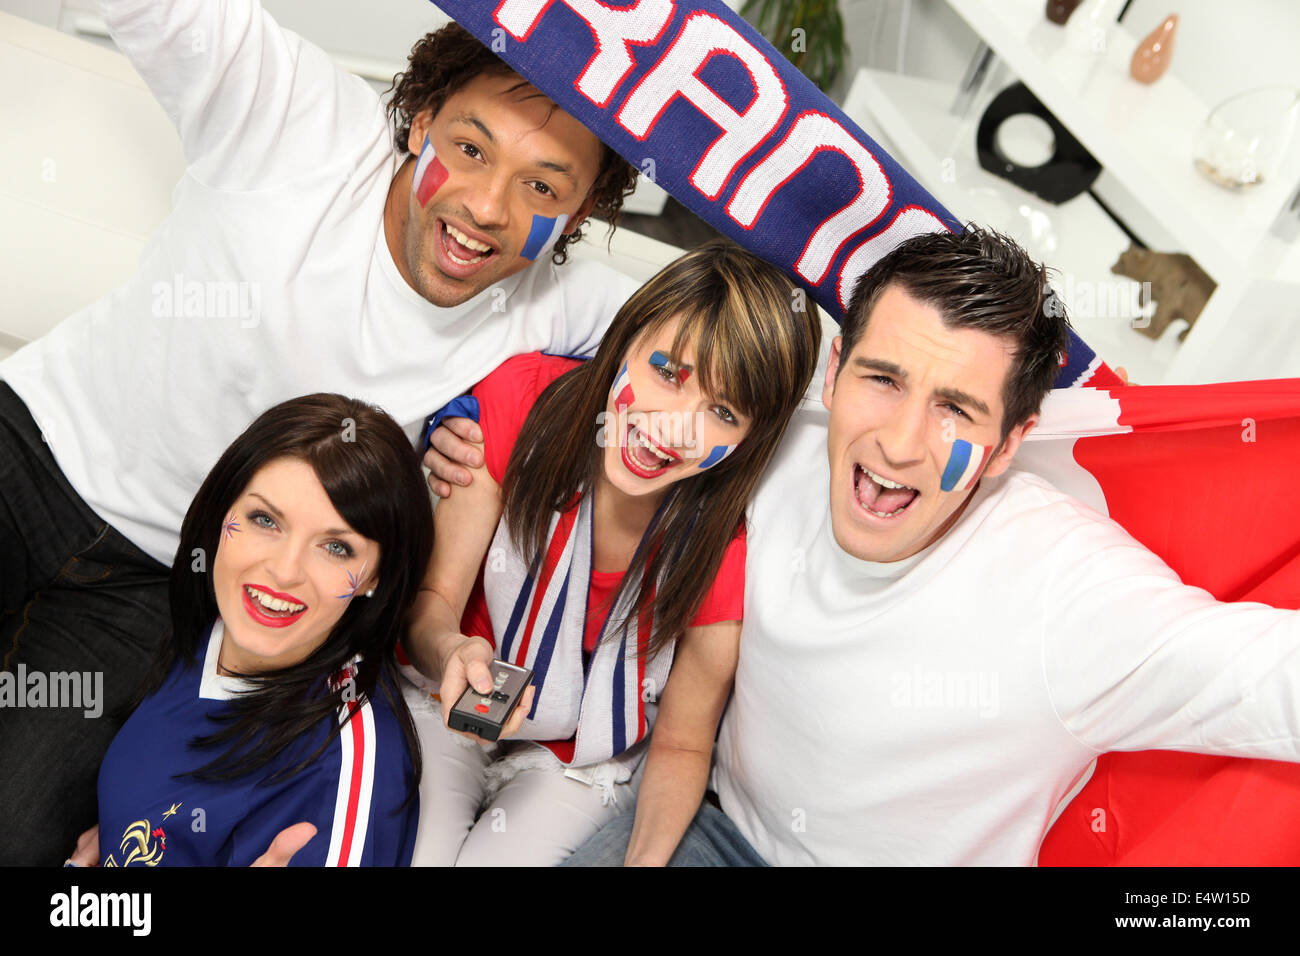 Young people supporting French sports team Stock Photo